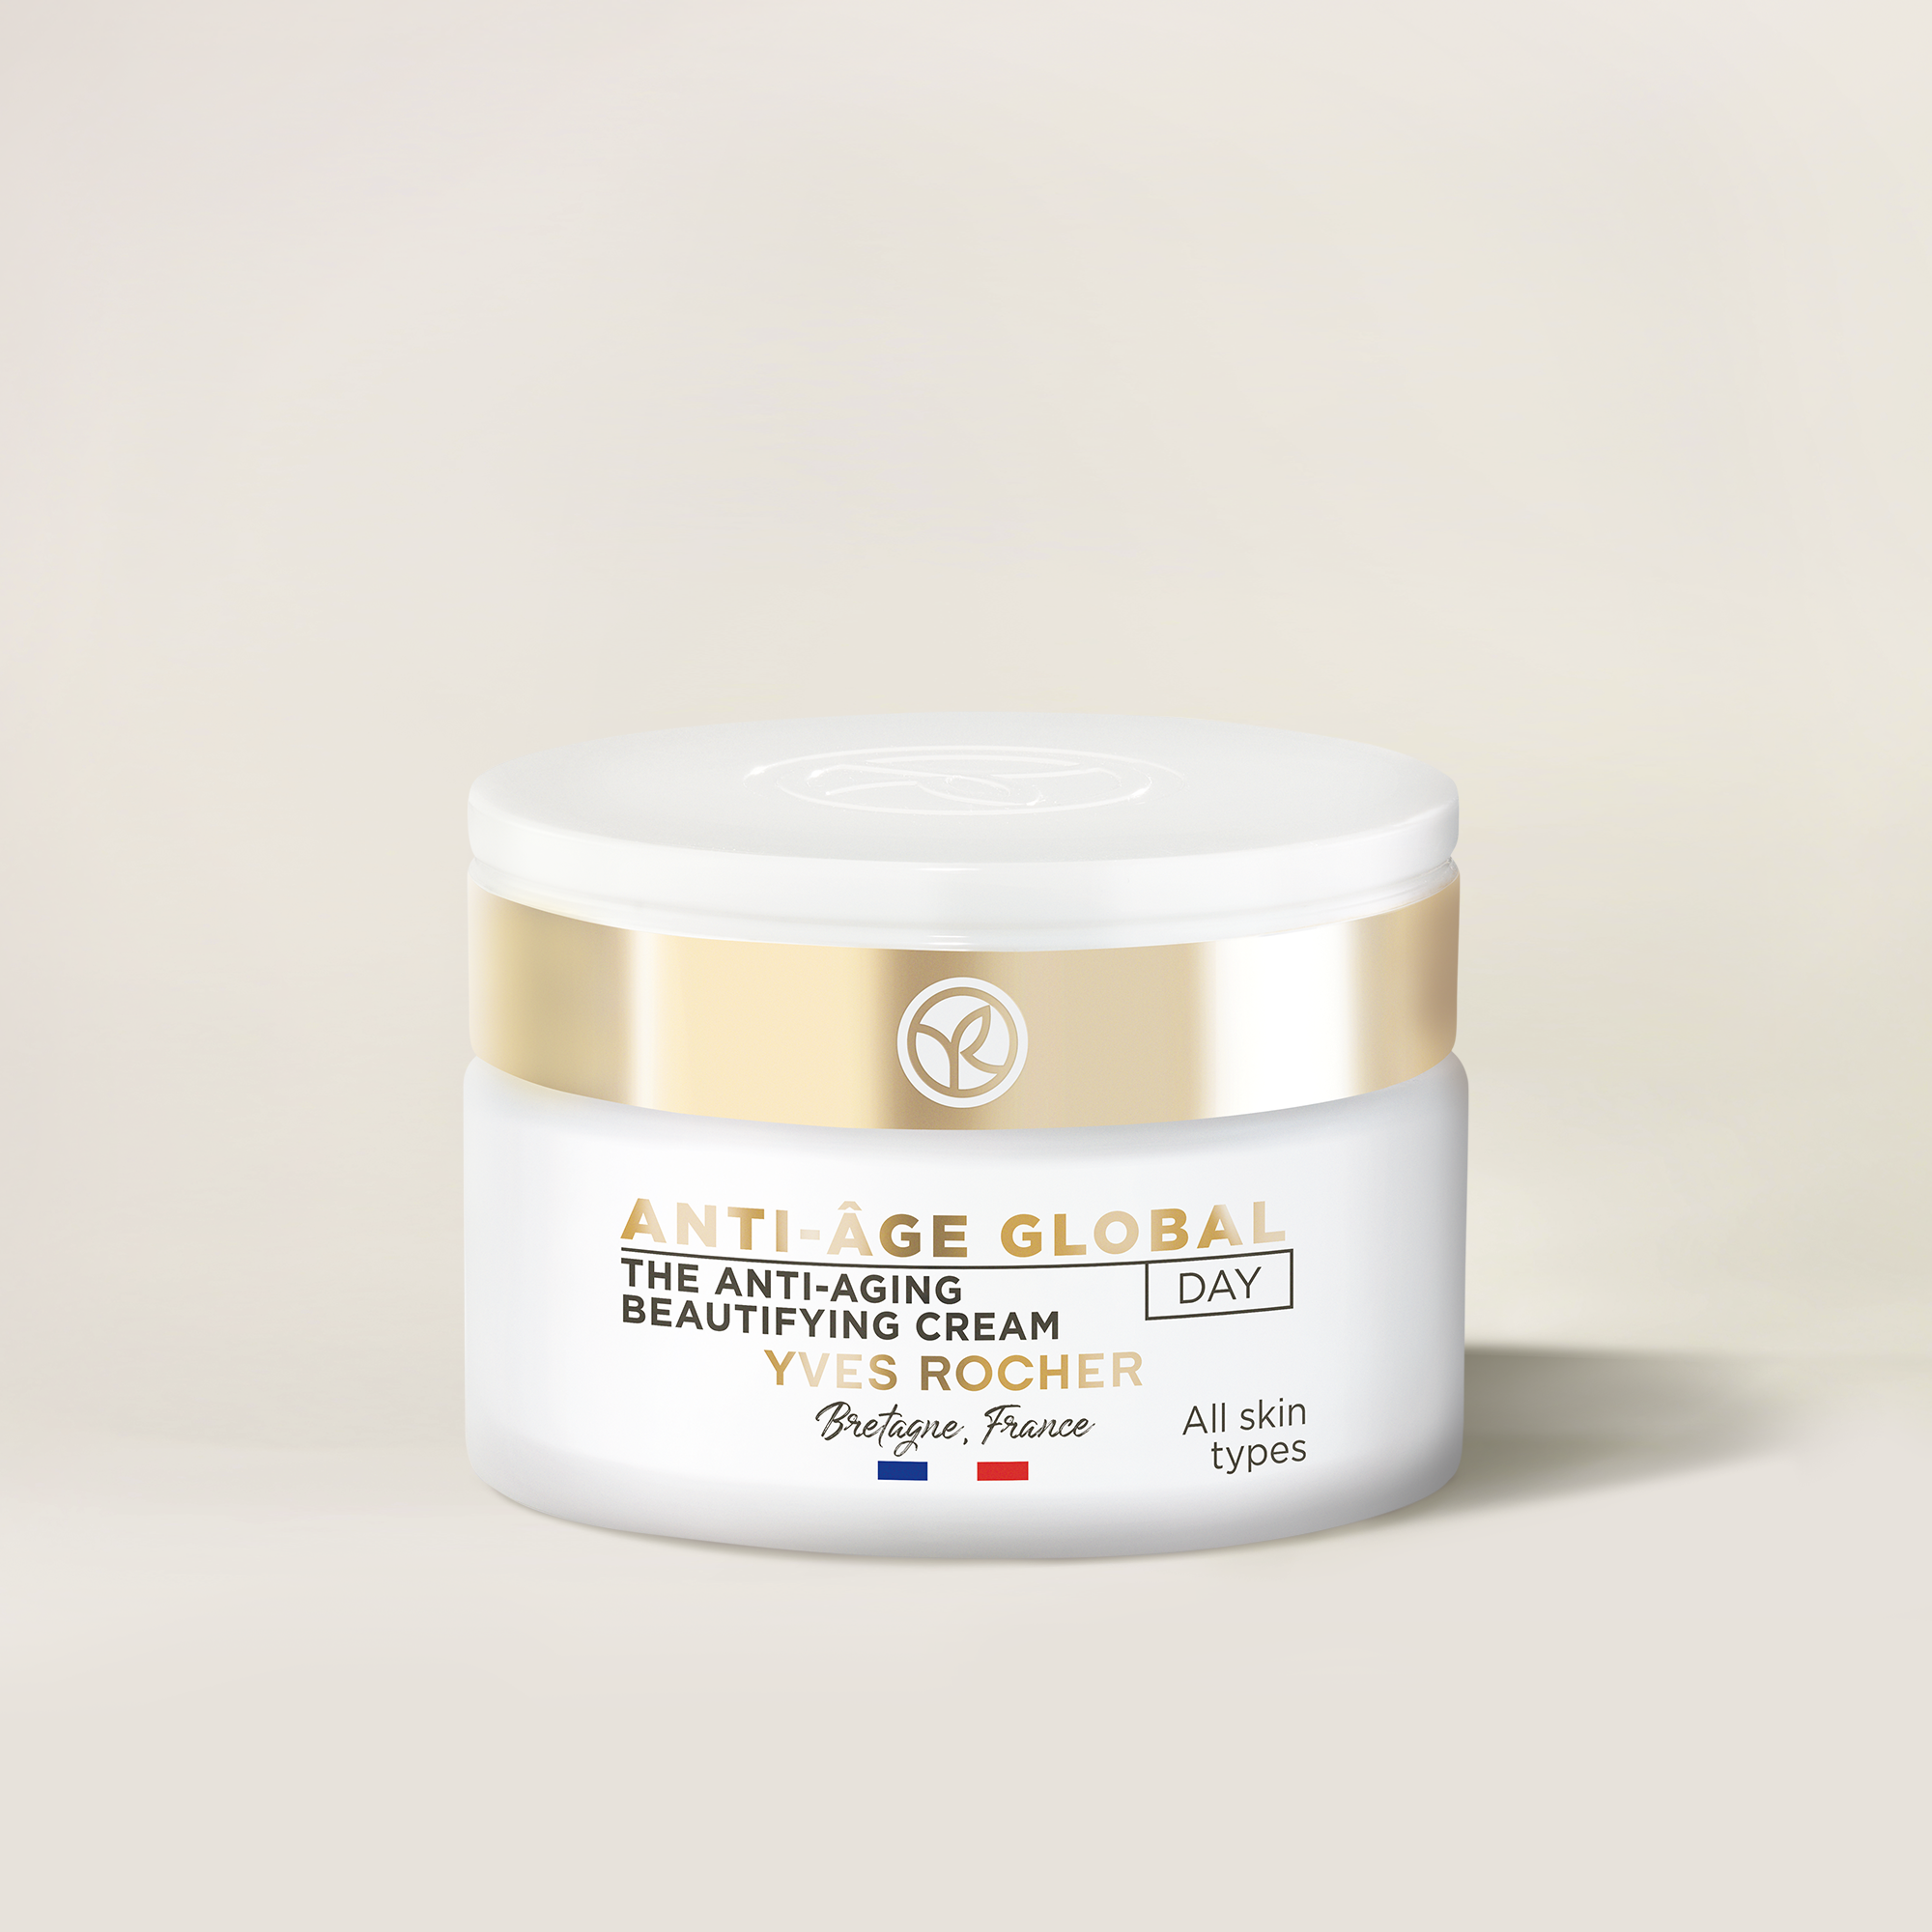 The Anti-Aging Beautifying Day Cream - All Skin Types